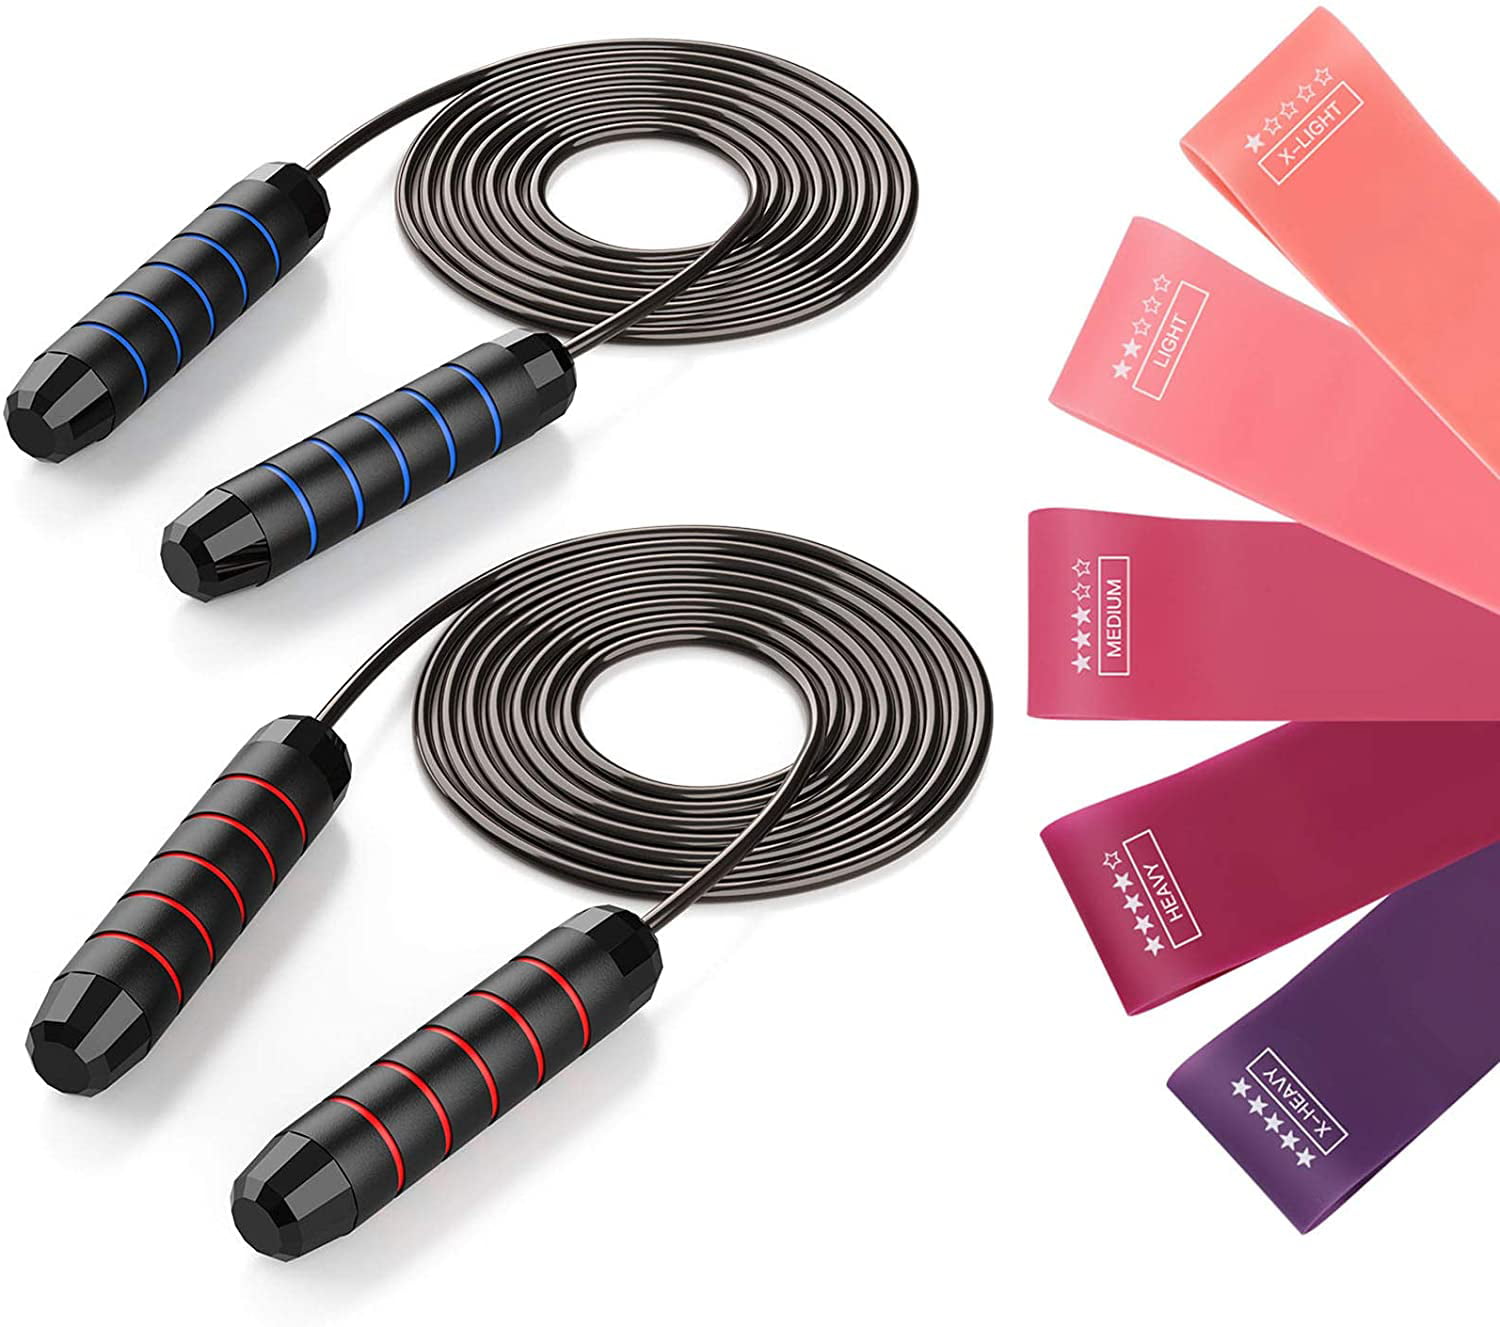 Jumping Rope and Resistance Exercise Bands,Tangle-Free with Ball Bearings Rapid Speed Jump Rope Set and Workout Jump Cable a Set of 5 Latex Workout Bands in Different Strength